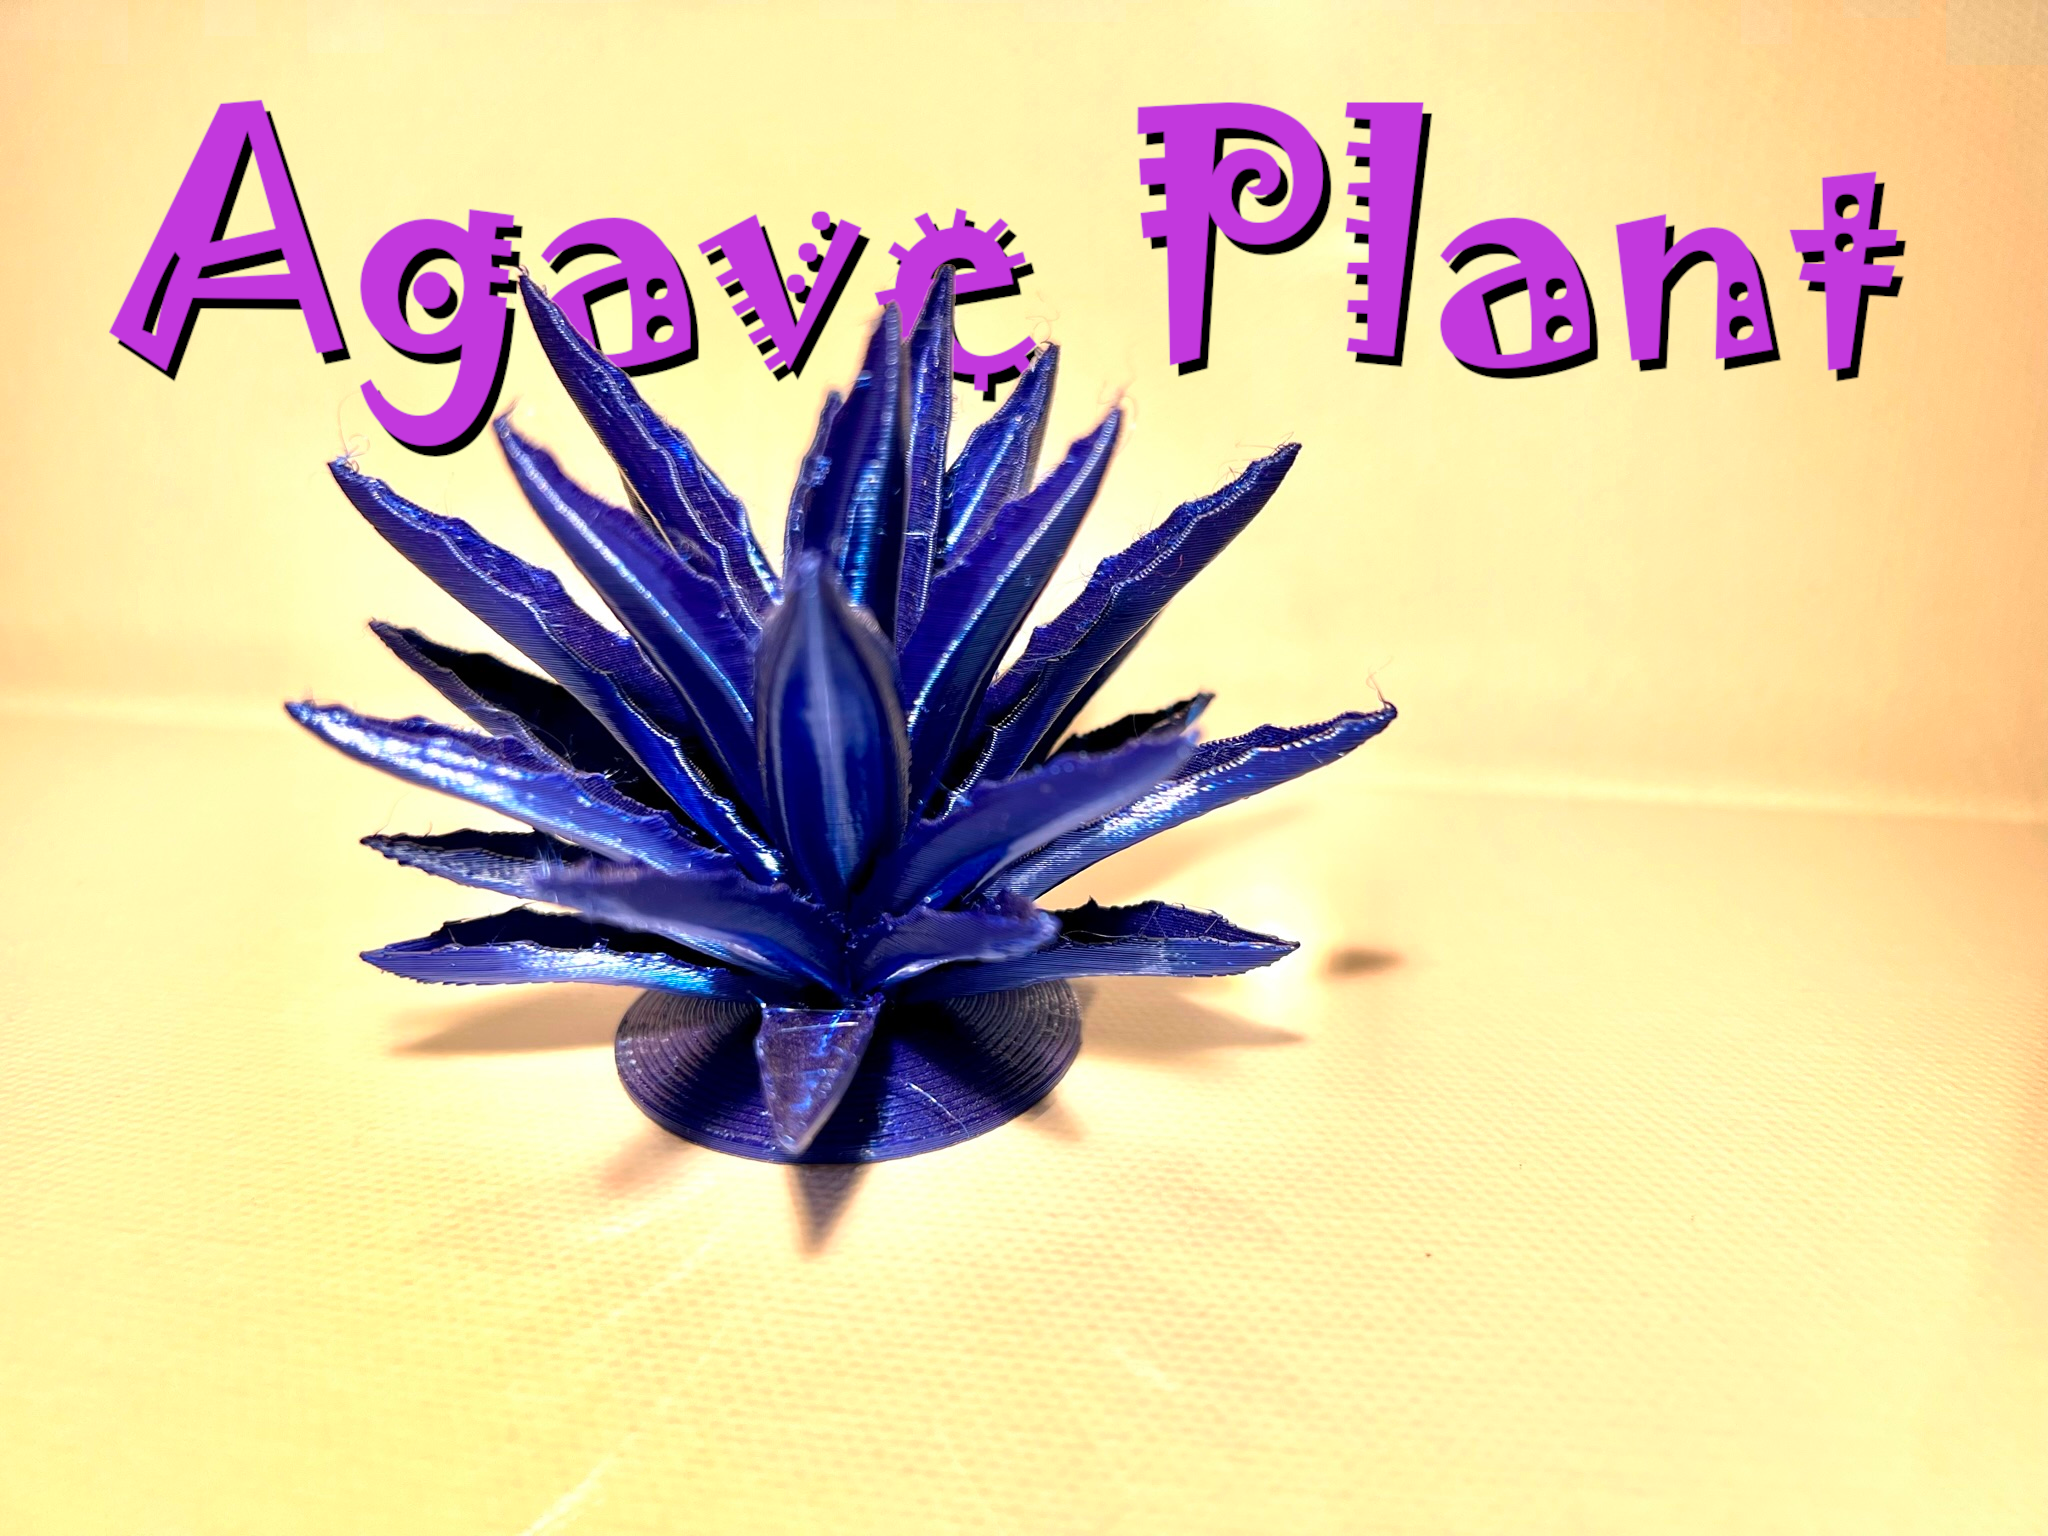 Agave Plant - (Tequila!)